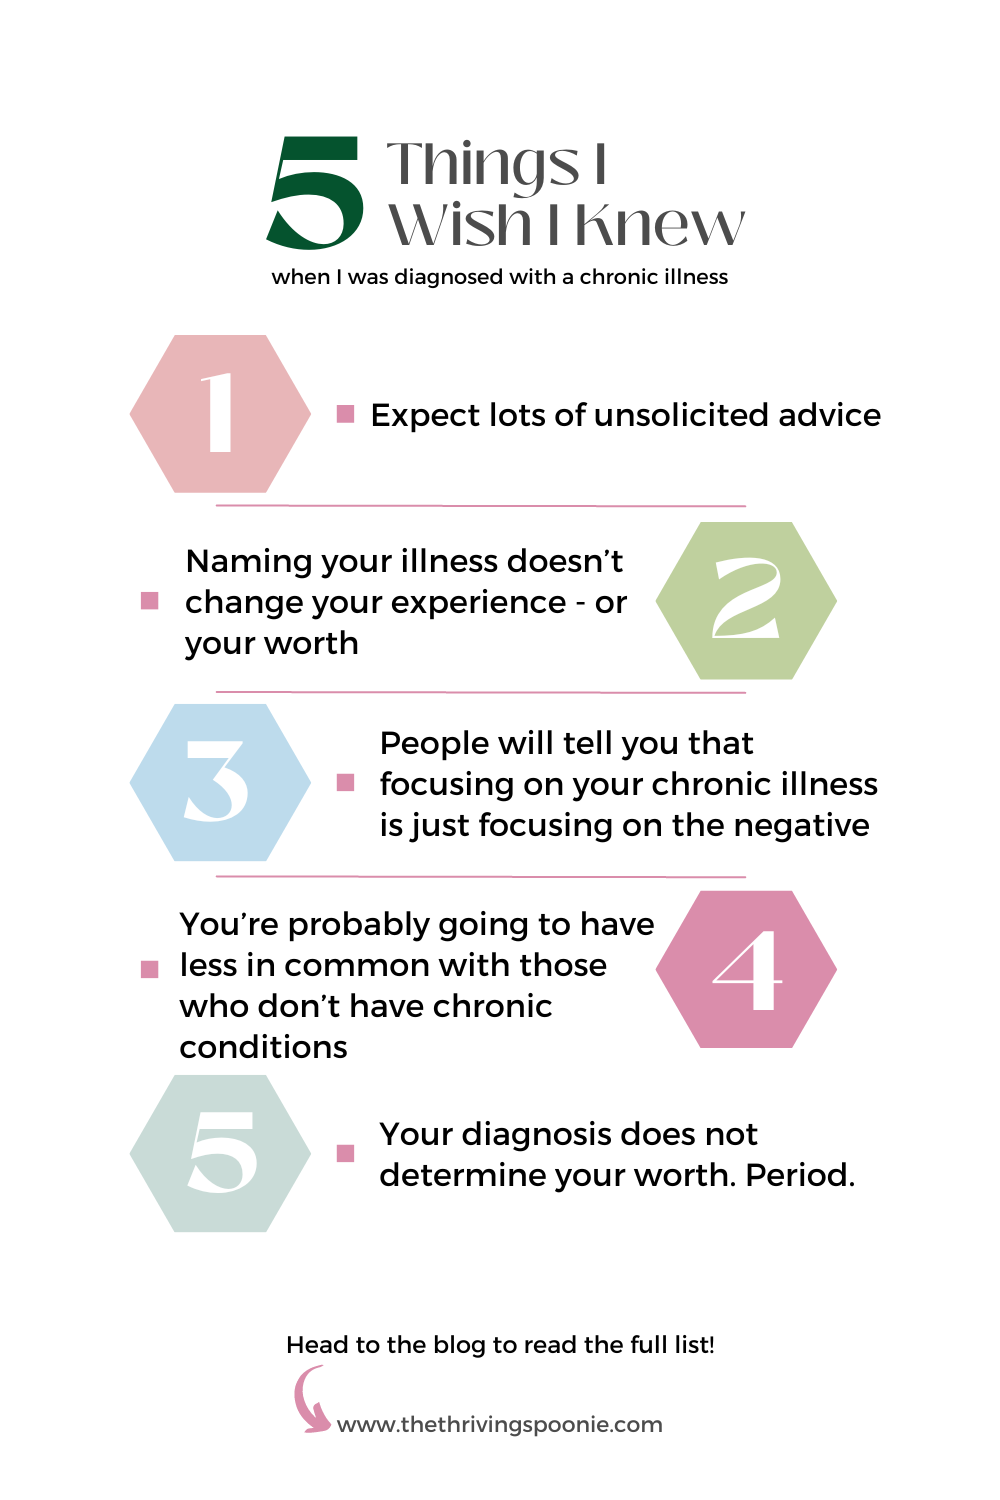 Here are 5 things that I wish I knew when I was diagnosed with a chronic illness. I’m sharing these in the hopes that if you’re newly diagnosed, you’ll get some of the emotional support I wish I had at that time. Head to the blog for the full list of 15 things I wish I knew when I was diagnosed.